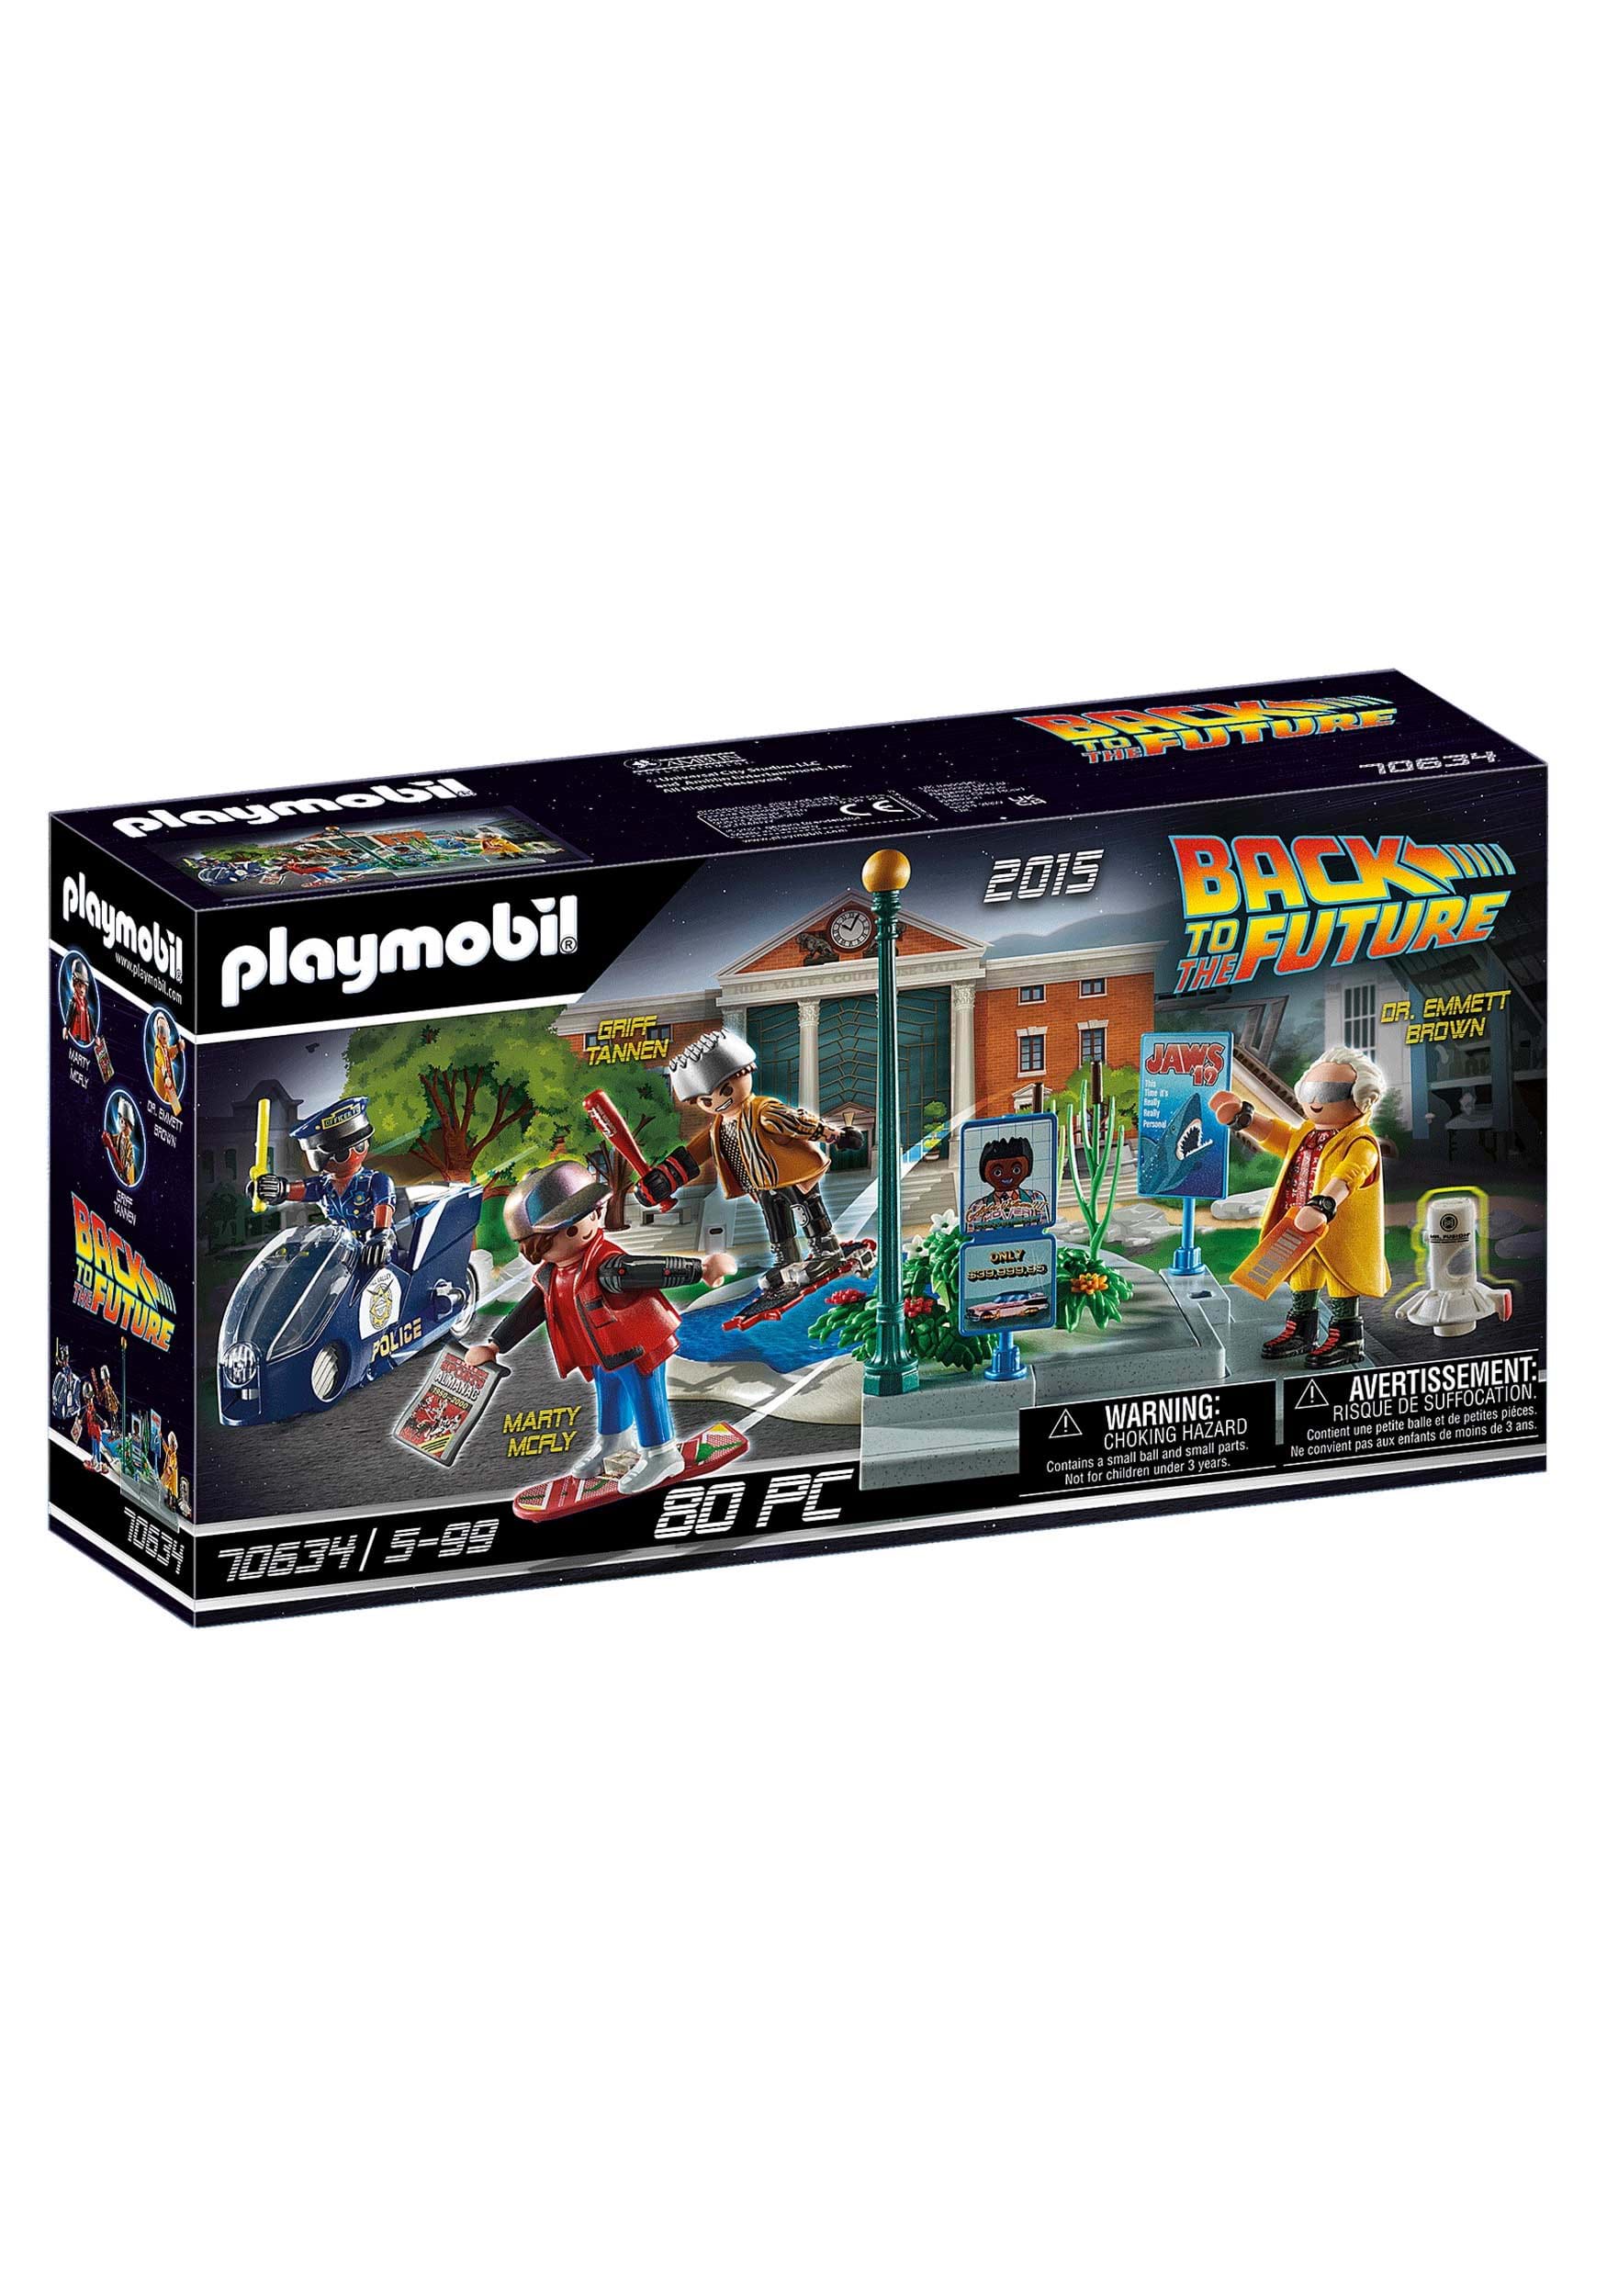 PLAYMOBIL Back to the Future 70634 Part II Hoverboard Chase - MaxxiDiscount